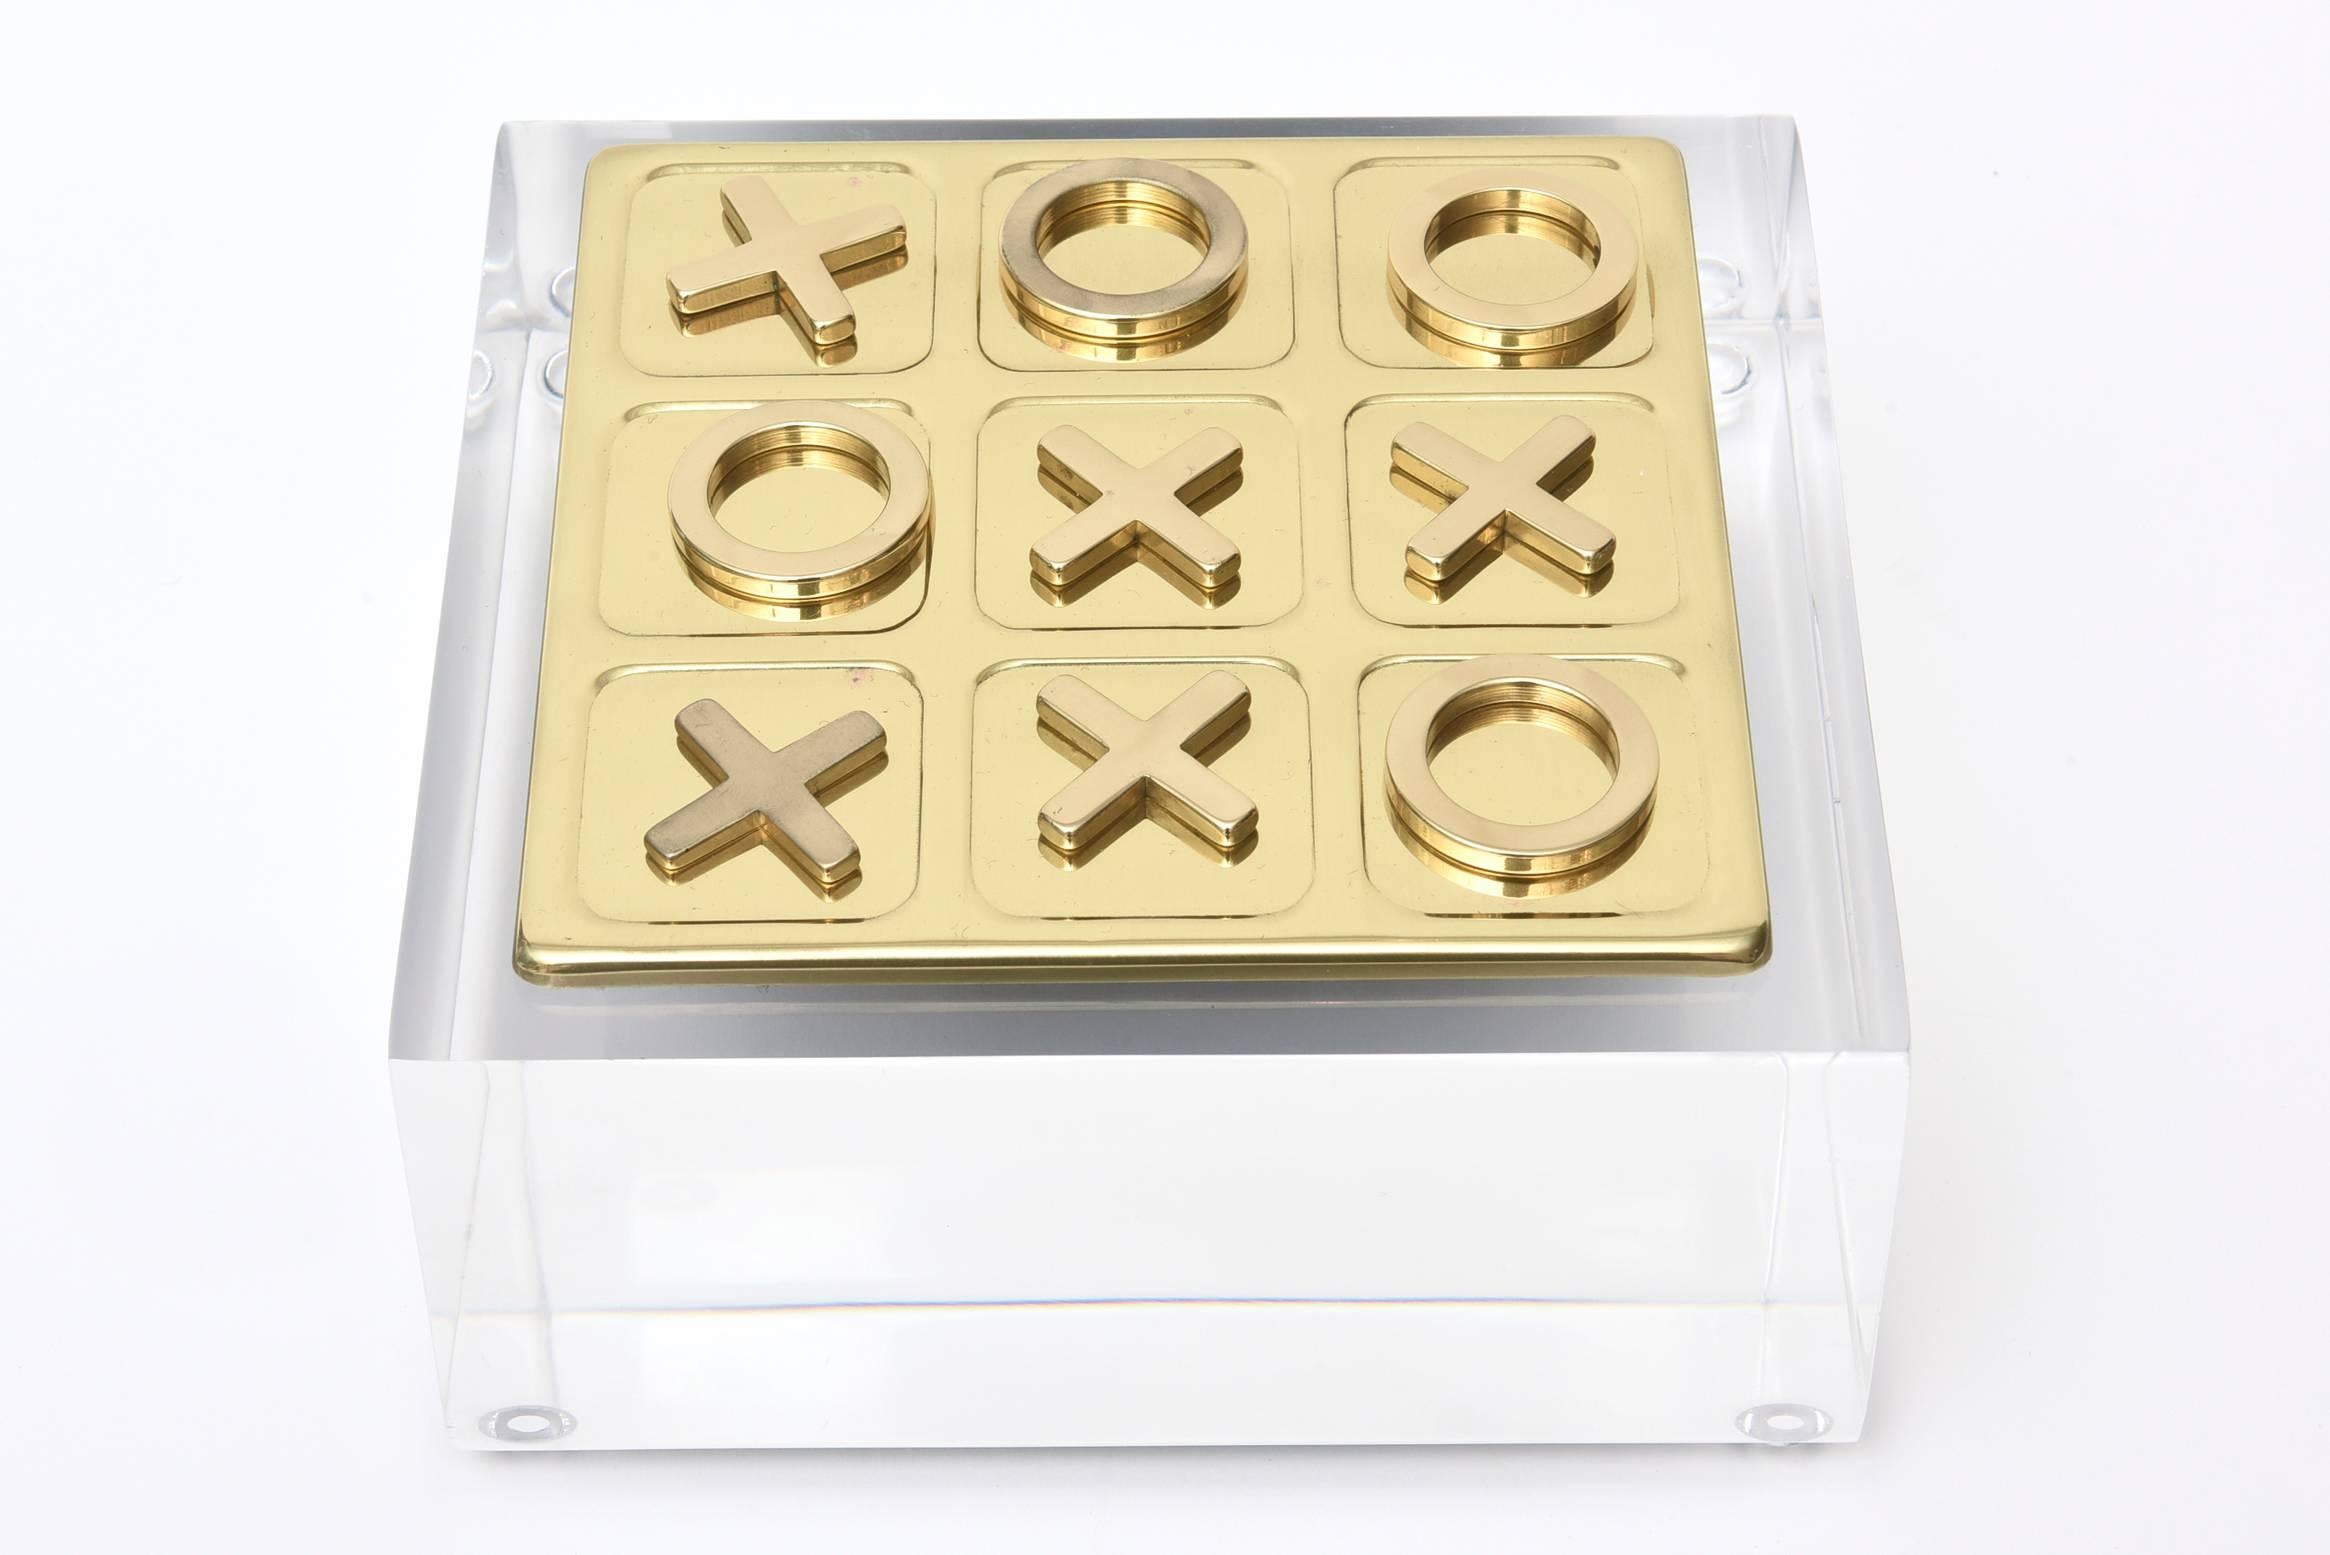 This is a small tabletop vintage game of tic tac toe of professionally polished brass resting on a thick Lucite base.
There is one extra player.
There is the board and ten players with the Lucite thick base.
The lucite base is not attached and is